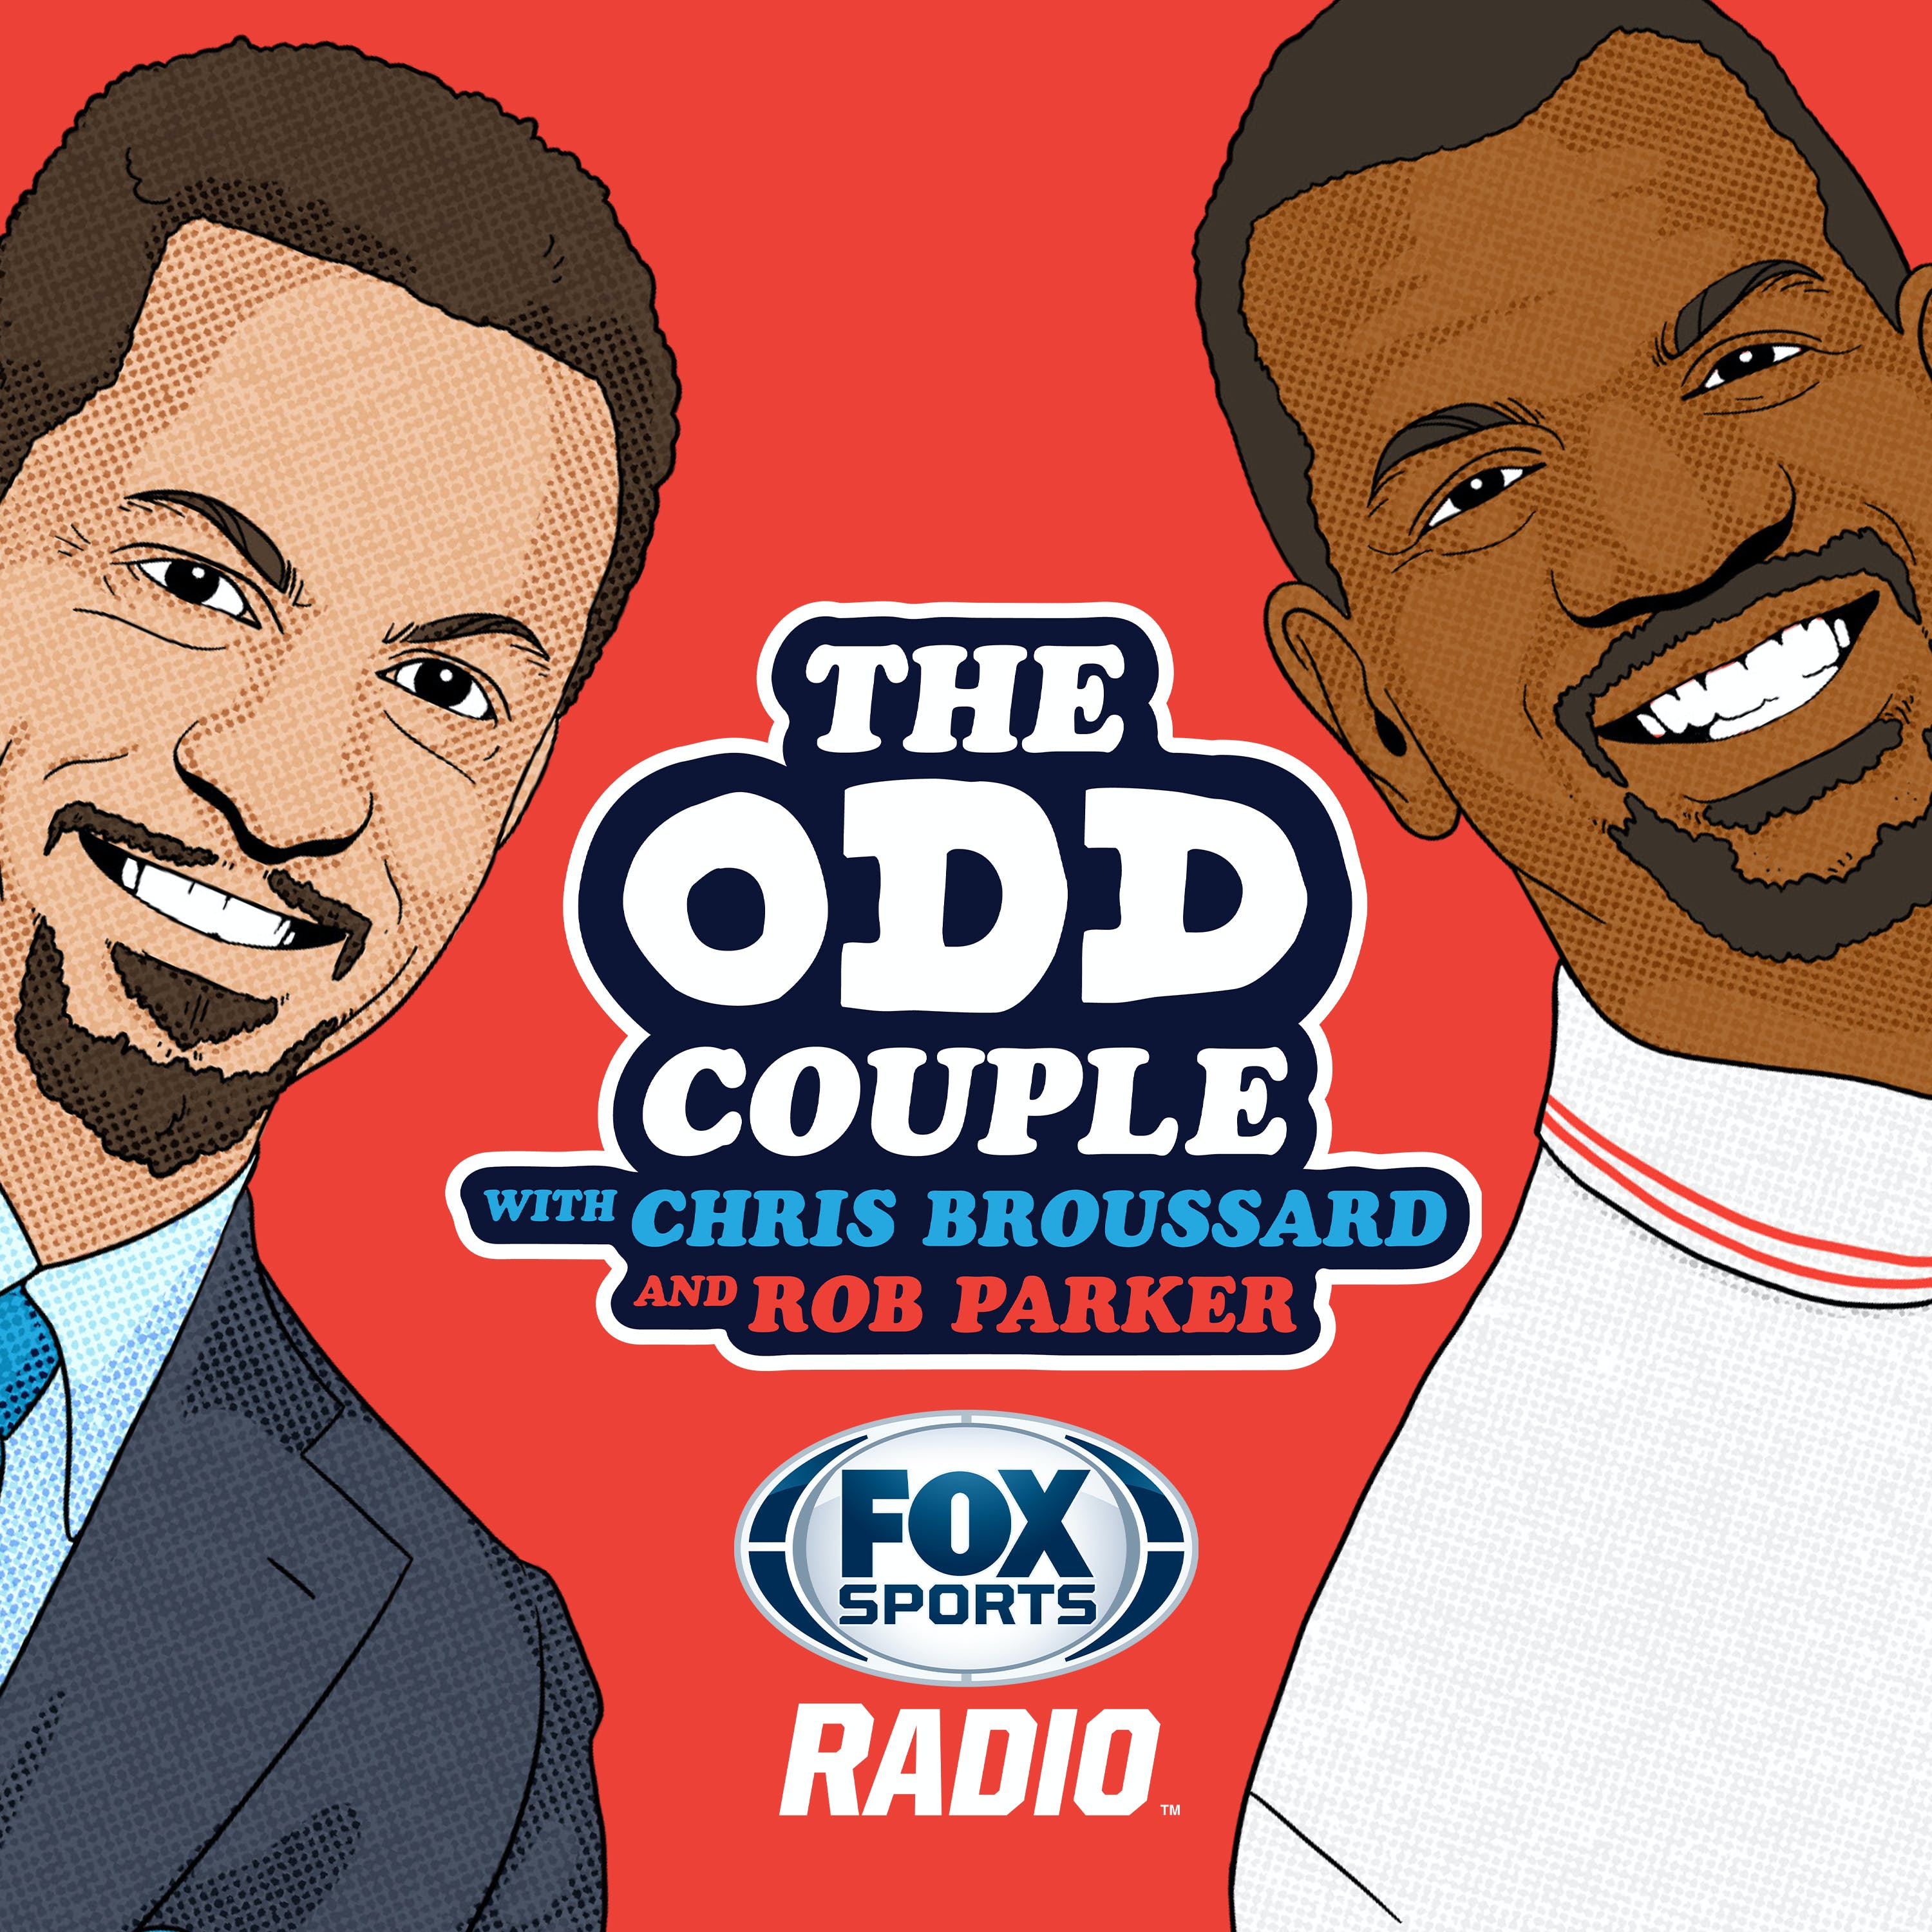 09/21/2021 - Best of The Odd Couple